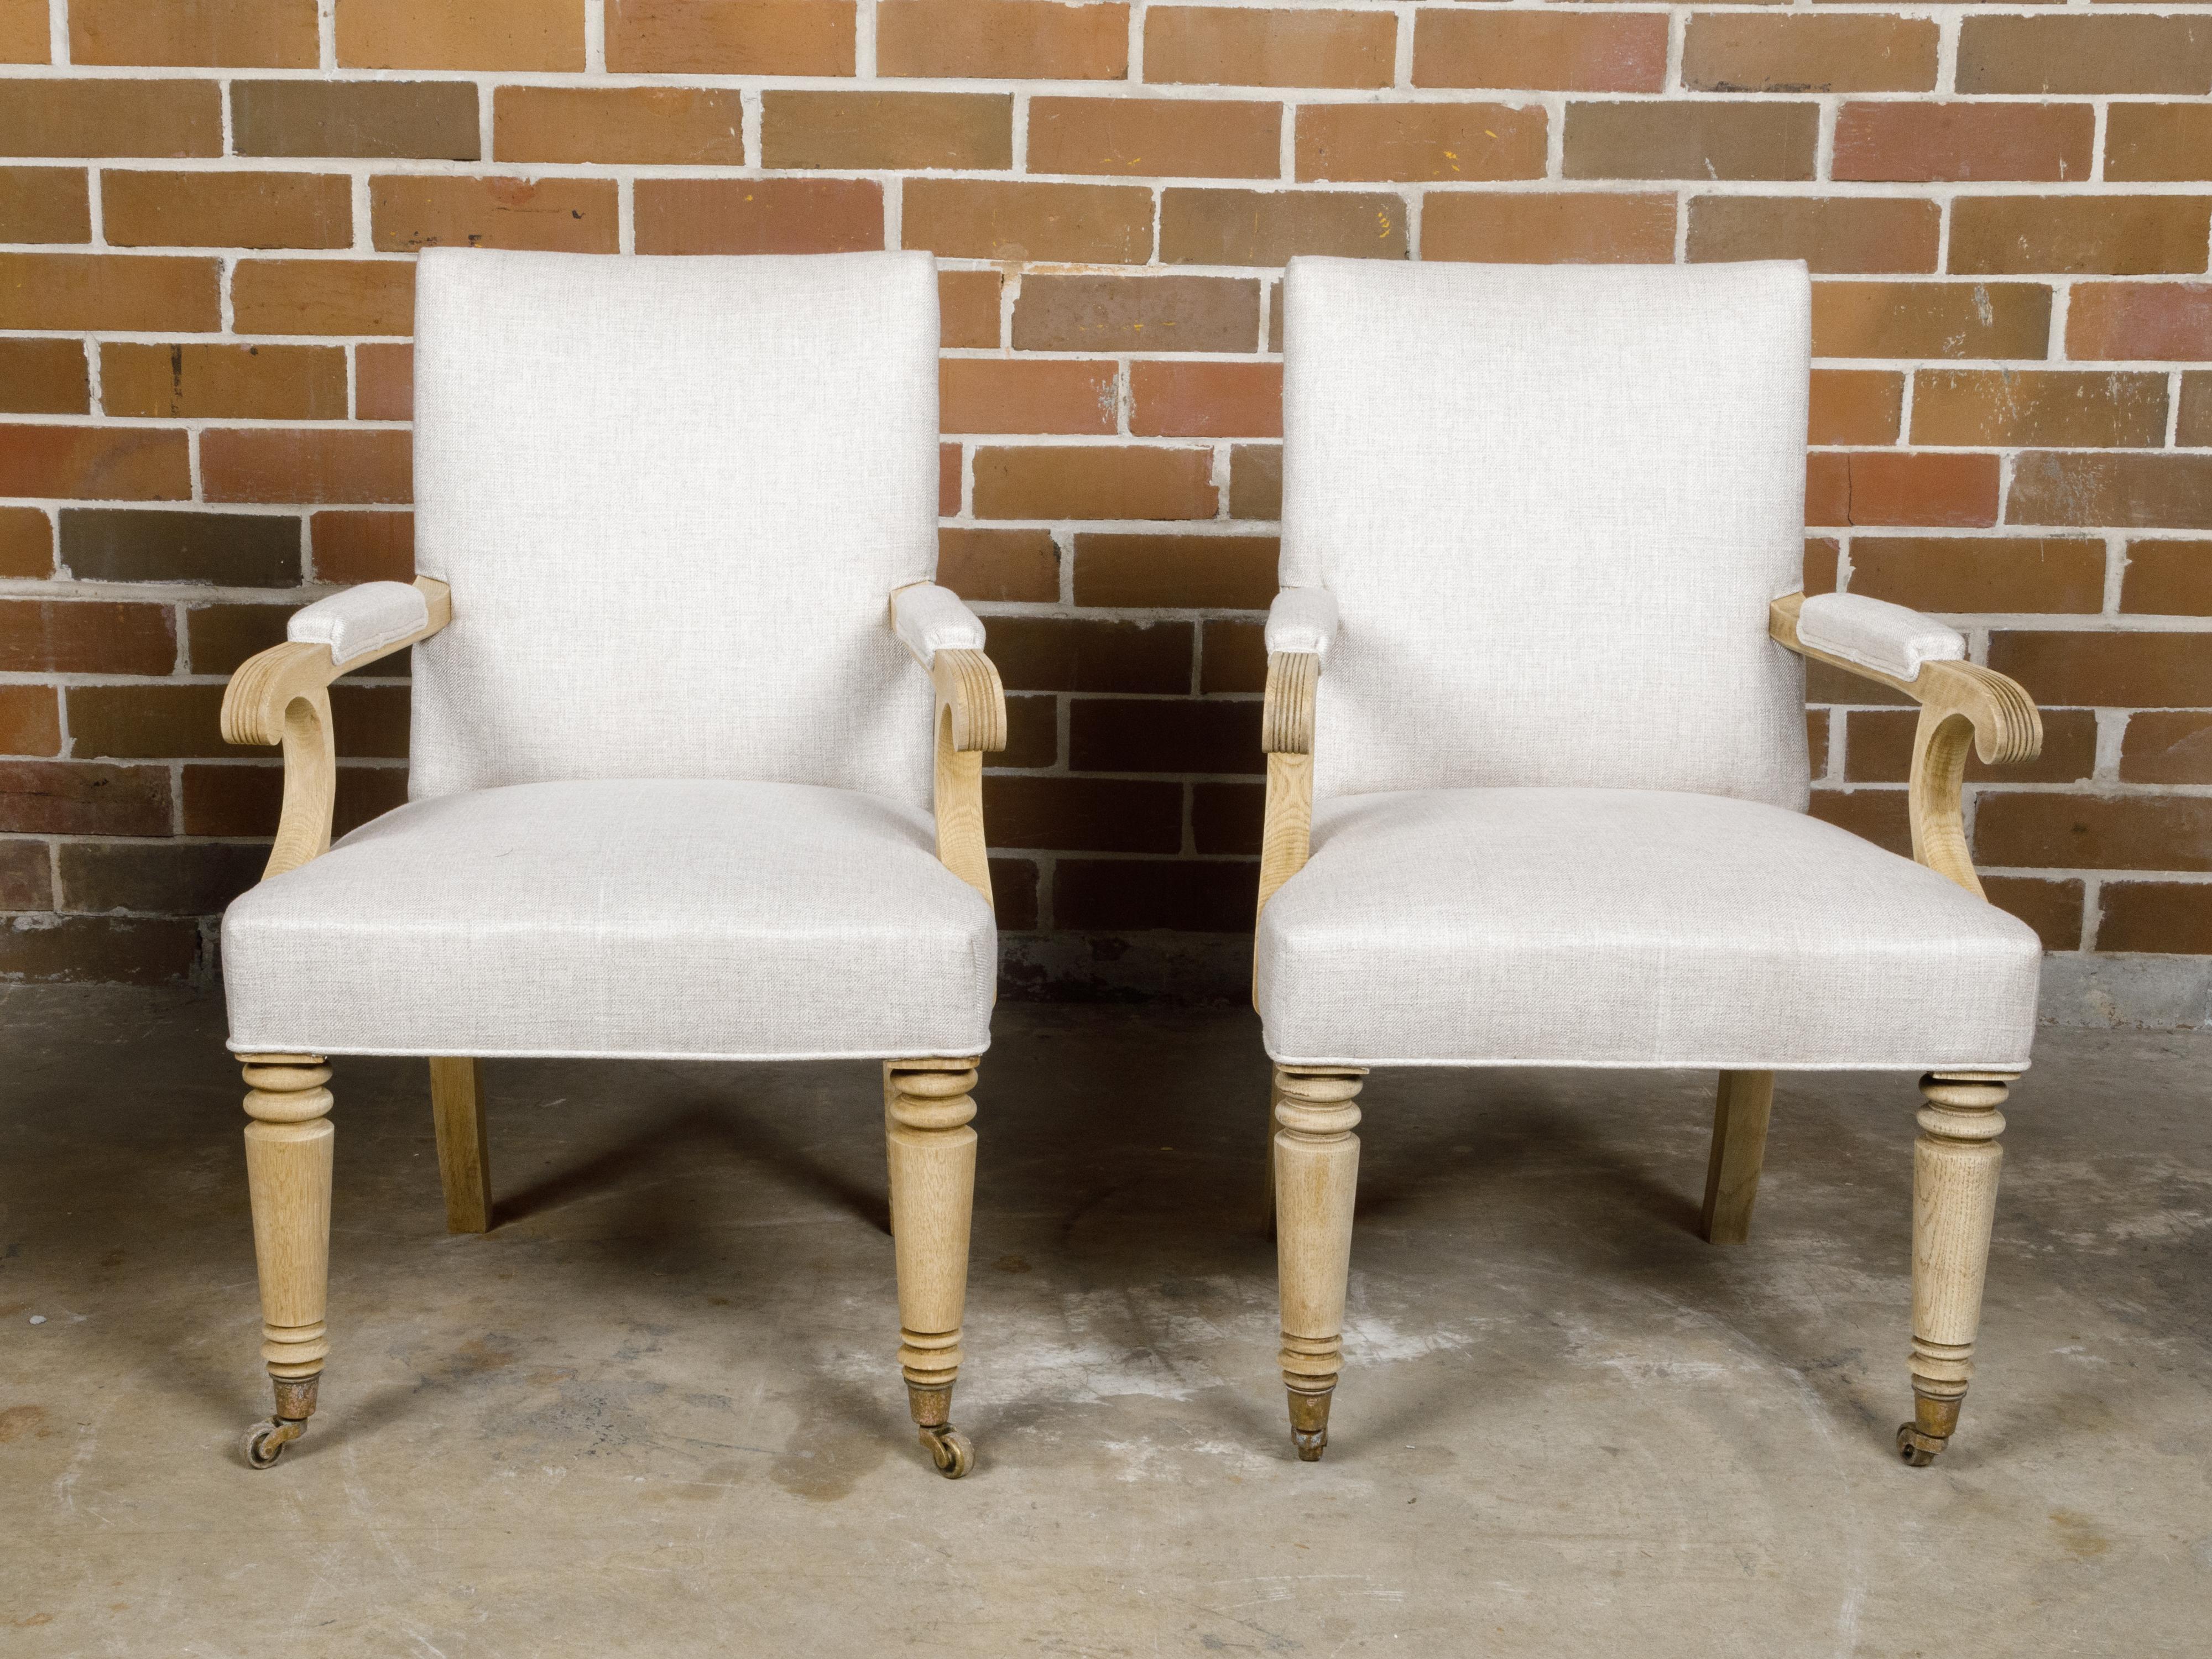 Turn of the Century English 1900s Bleached Armchairs with Linen Upholstery, Pair In Good Condition For Sale In Atlanta, GA